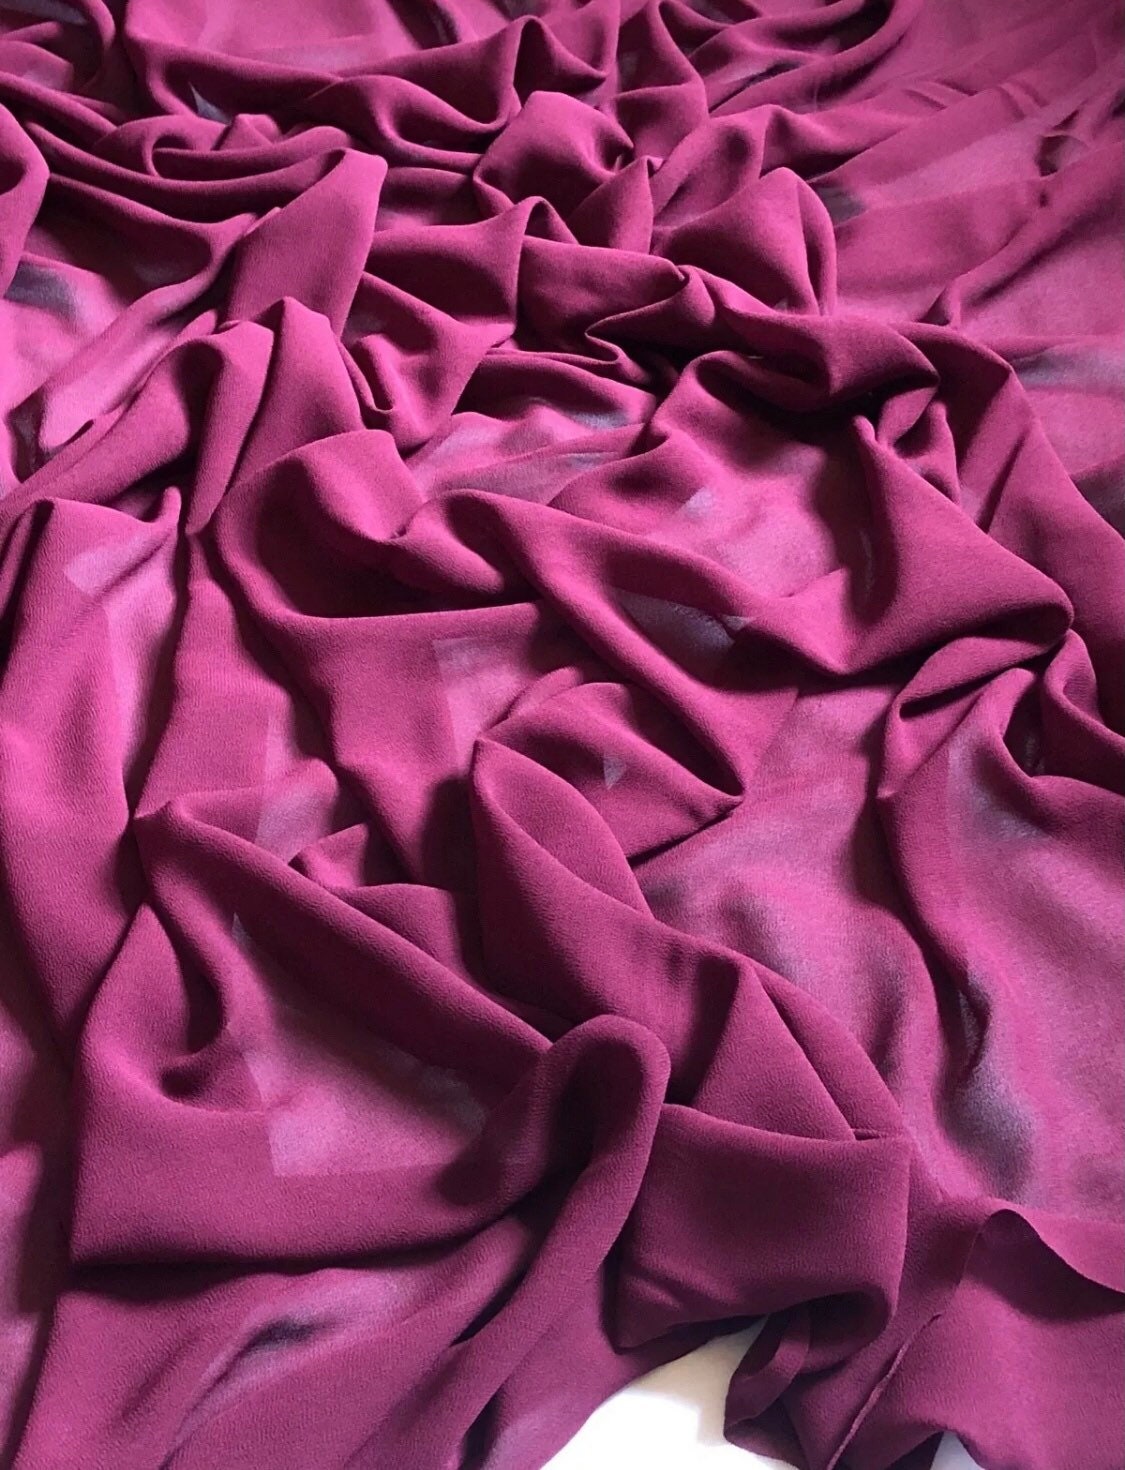 fabric sample swatches, purple shades, dark and lite purples and more you  choose